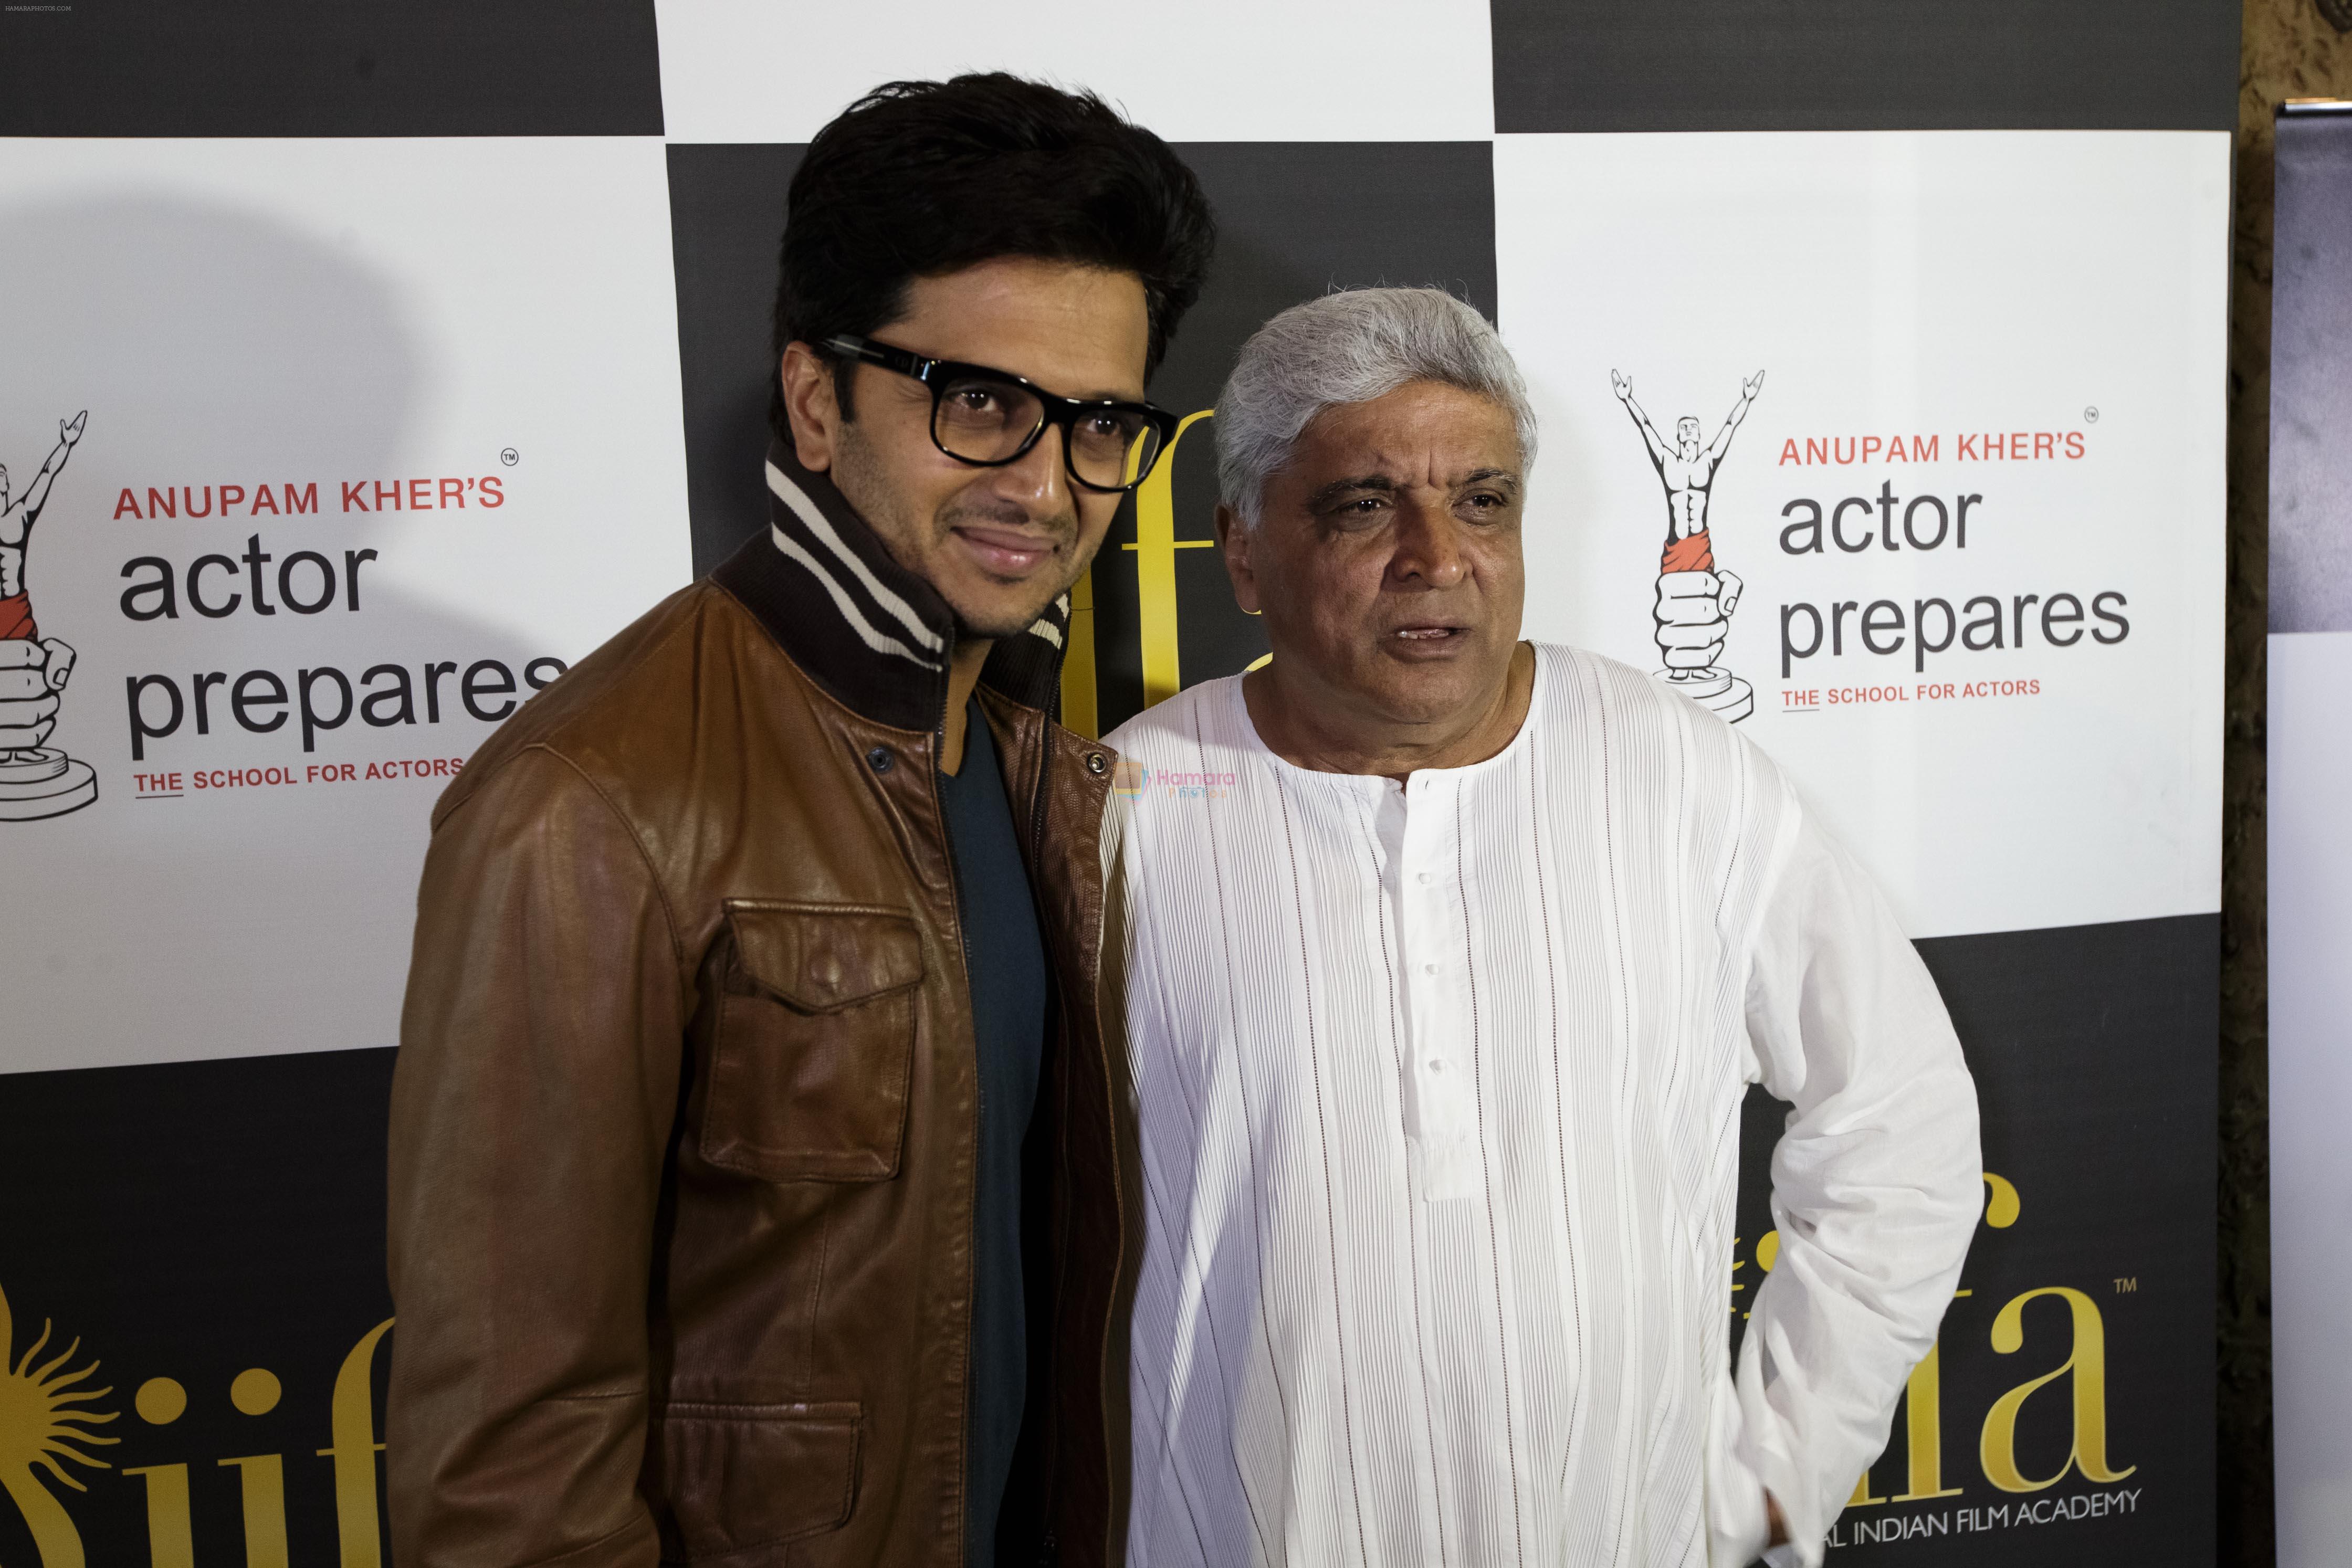 Riteish Deshmukh, Javed Akhtar at IIFA Premier and Workshop by Anupam Kher in Tampa Theater on 24th April 2014